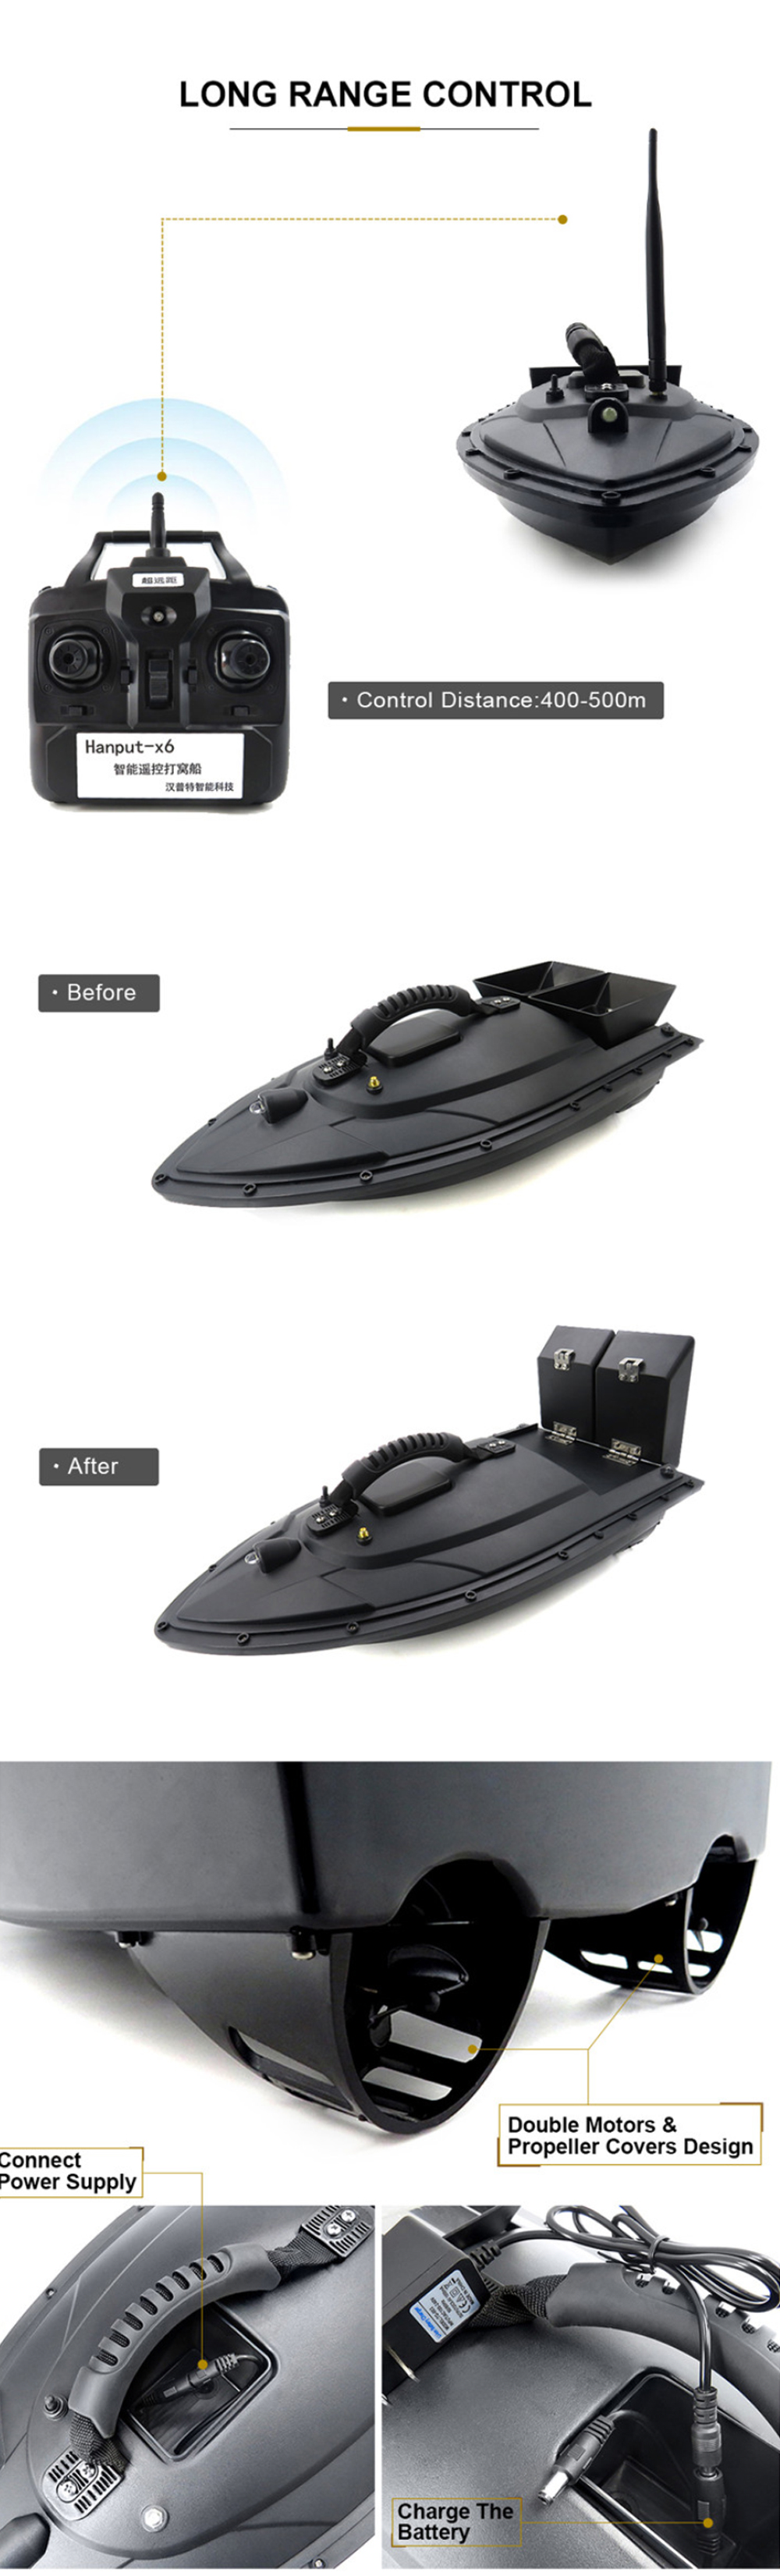 ZANLURE-500m-Smart-Fishing-Bait-Boat-Double-Silo-RC-Boat-Electric-Intelligent-Fish-Finder-Boat-Outdo-1773247-2